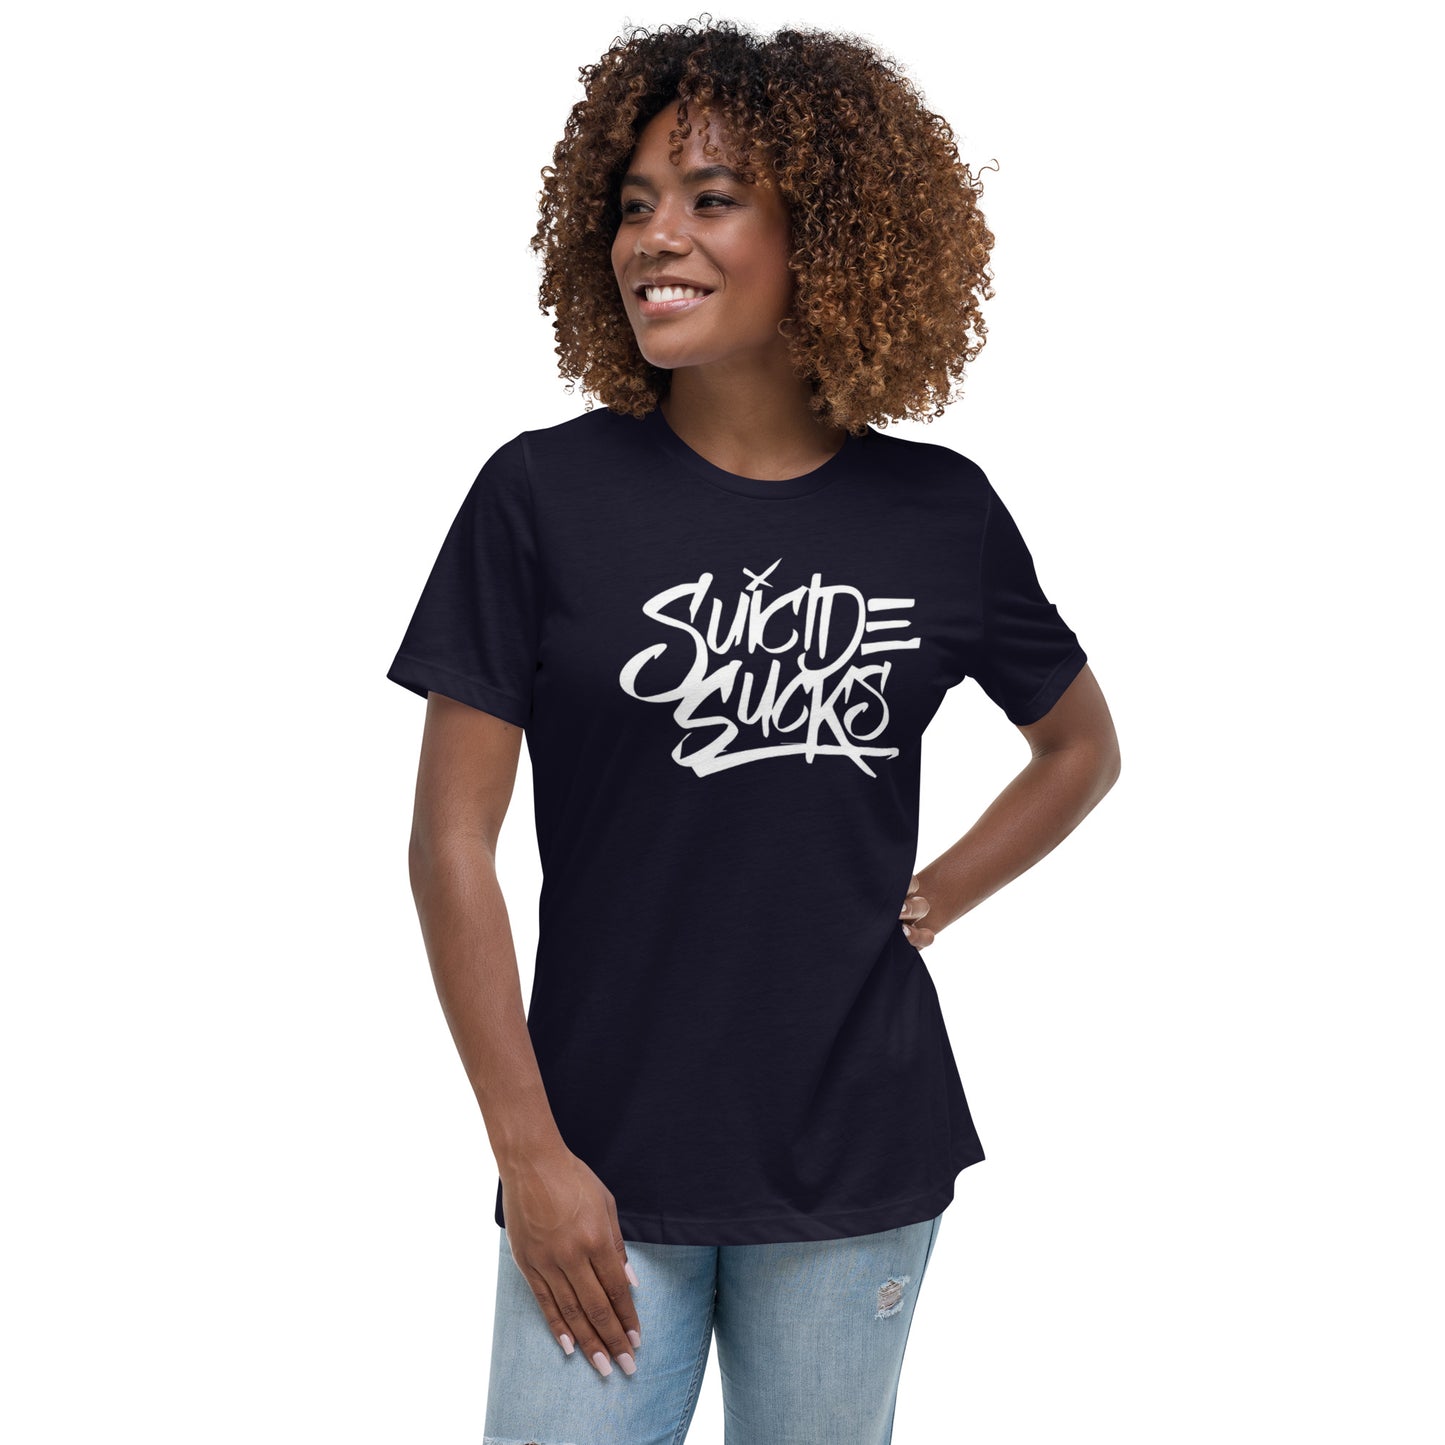 Let People Know You Care - Women's Relaxed Fit, Cotton T-Shirt